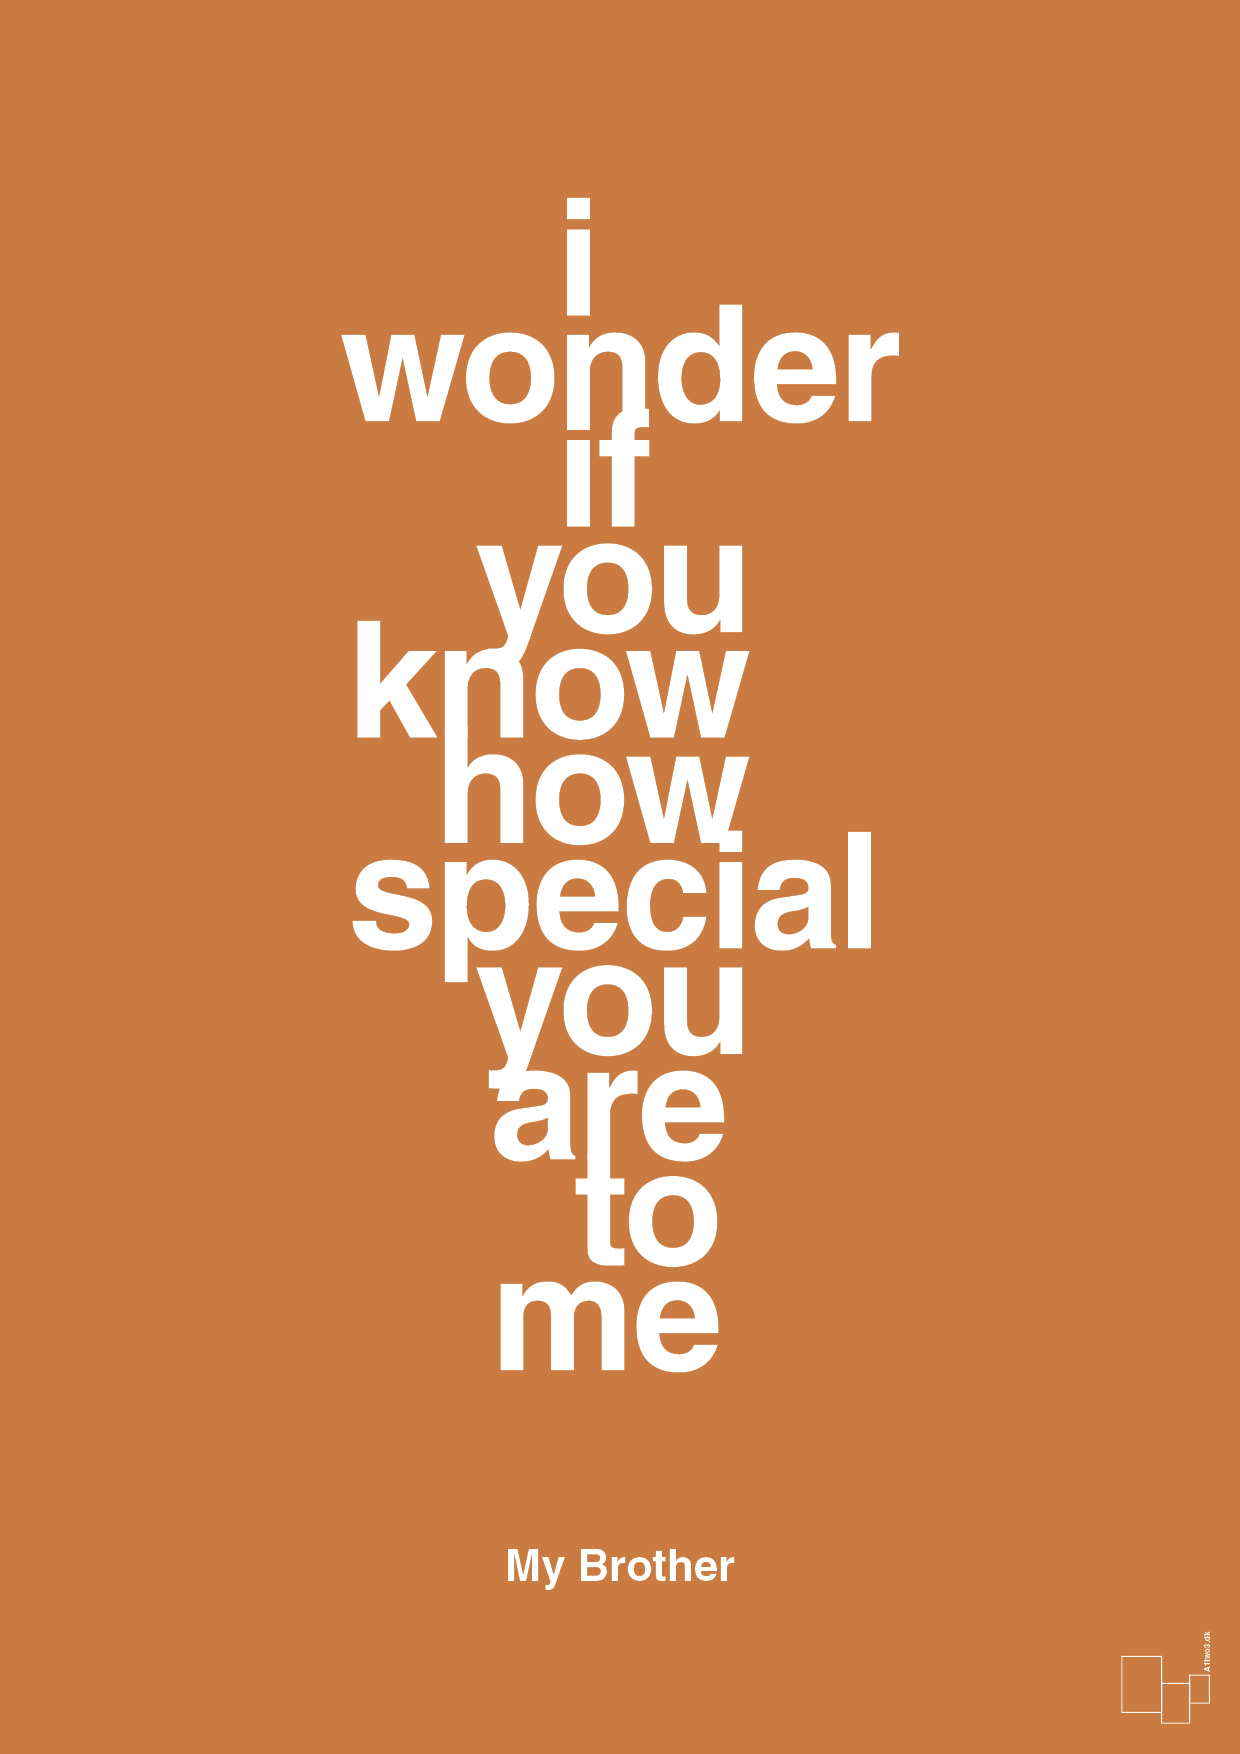 my brother - i wonder if you know how special you are to me - Plakat med Citater i Rumba Orange